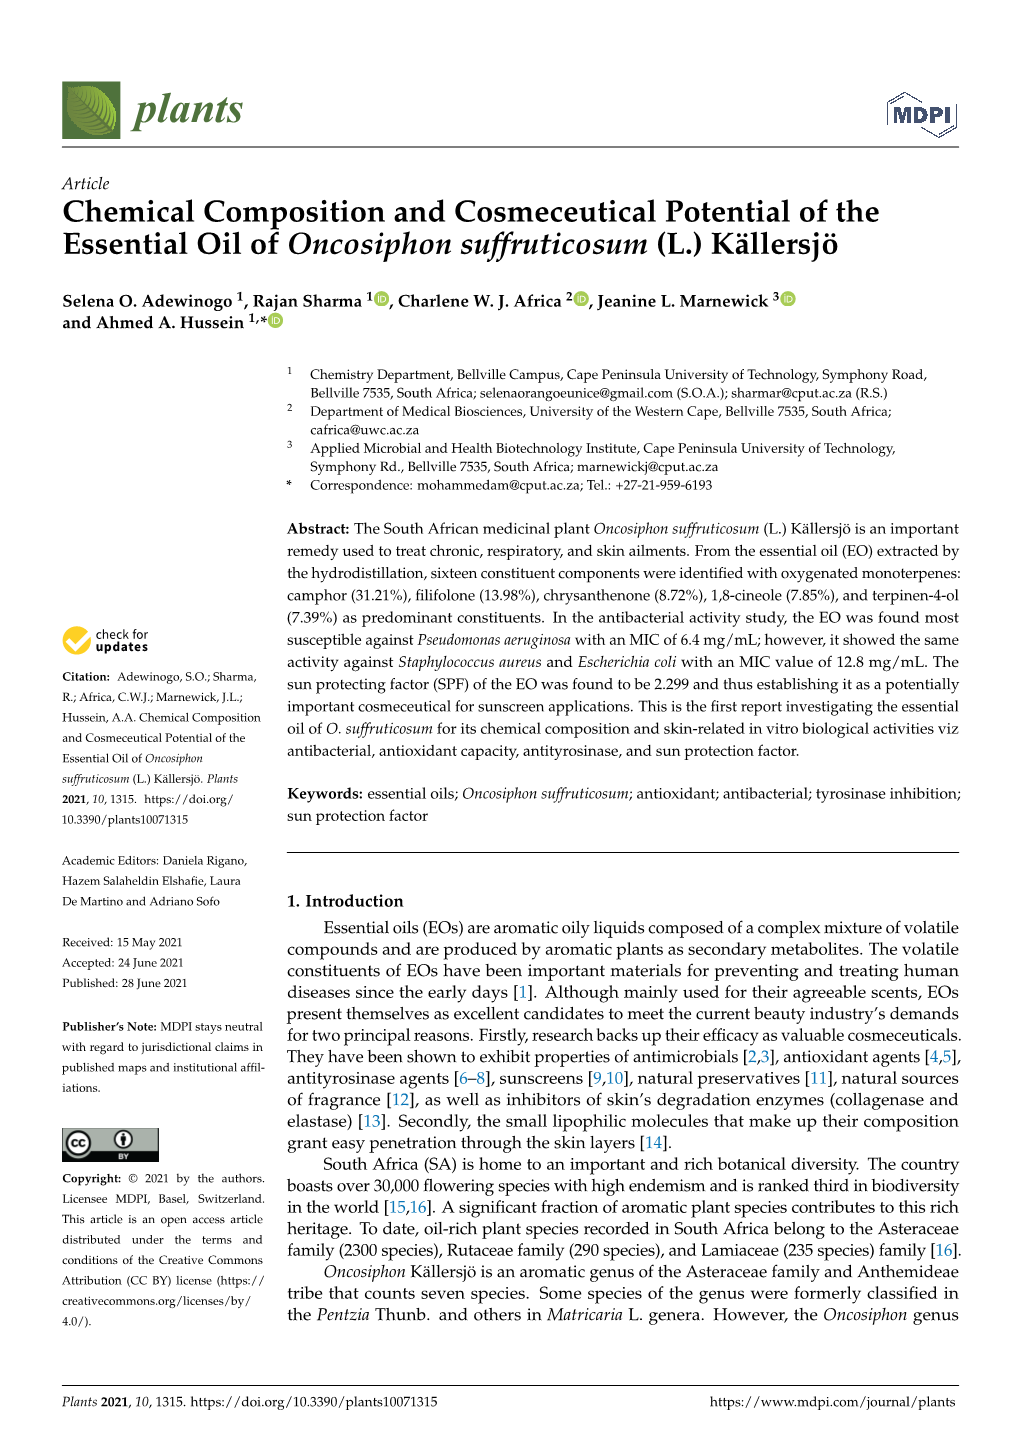 Chemical Composition and Cosmeceutical Potential of the Essential Oil of Oncosiphon Suffruticosum (L.) Källersjö